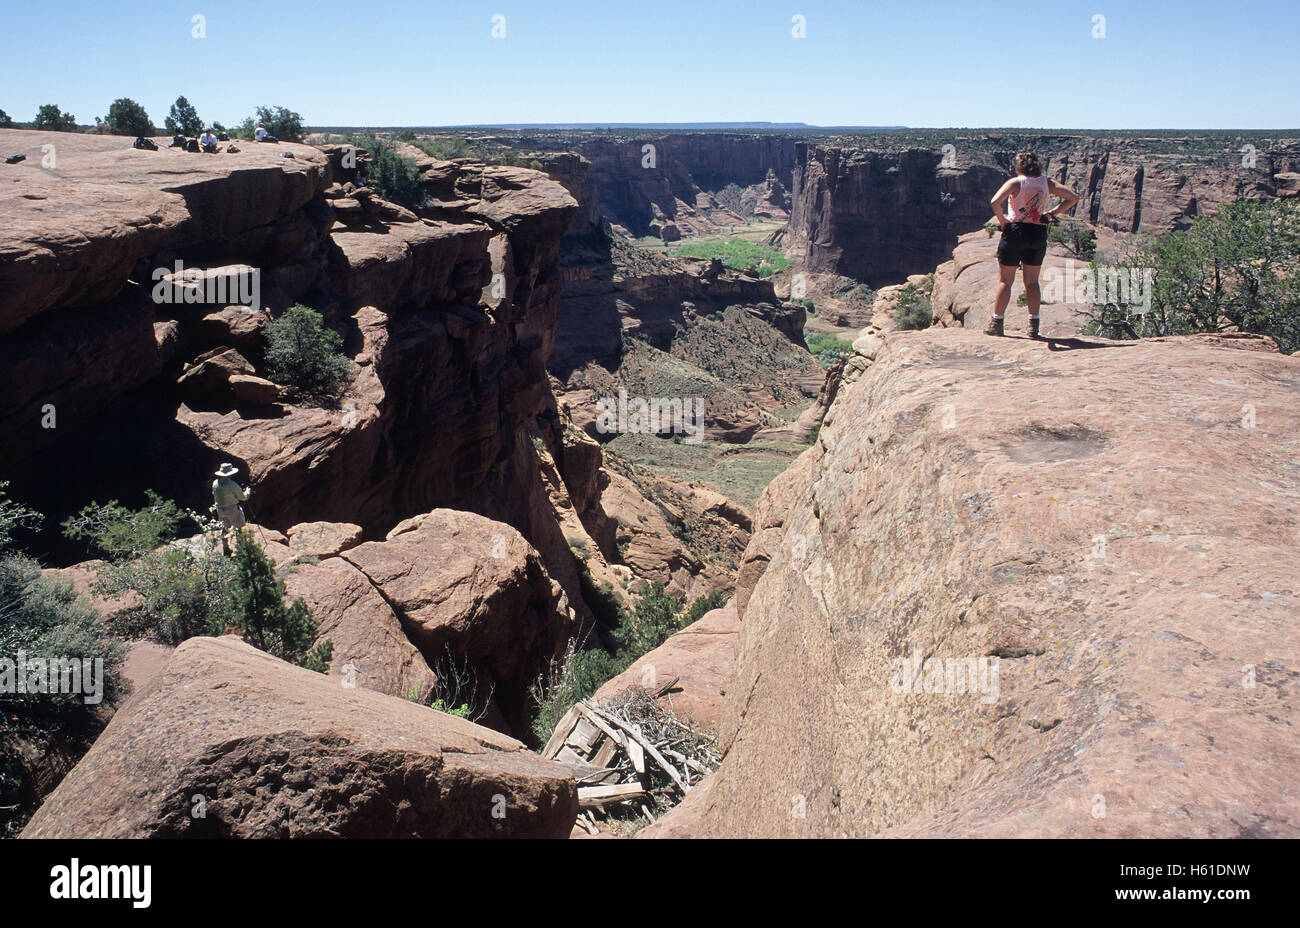 Hikers on north rim overlooking Canyon de Chelly National Monument, Arizona Stock Photo